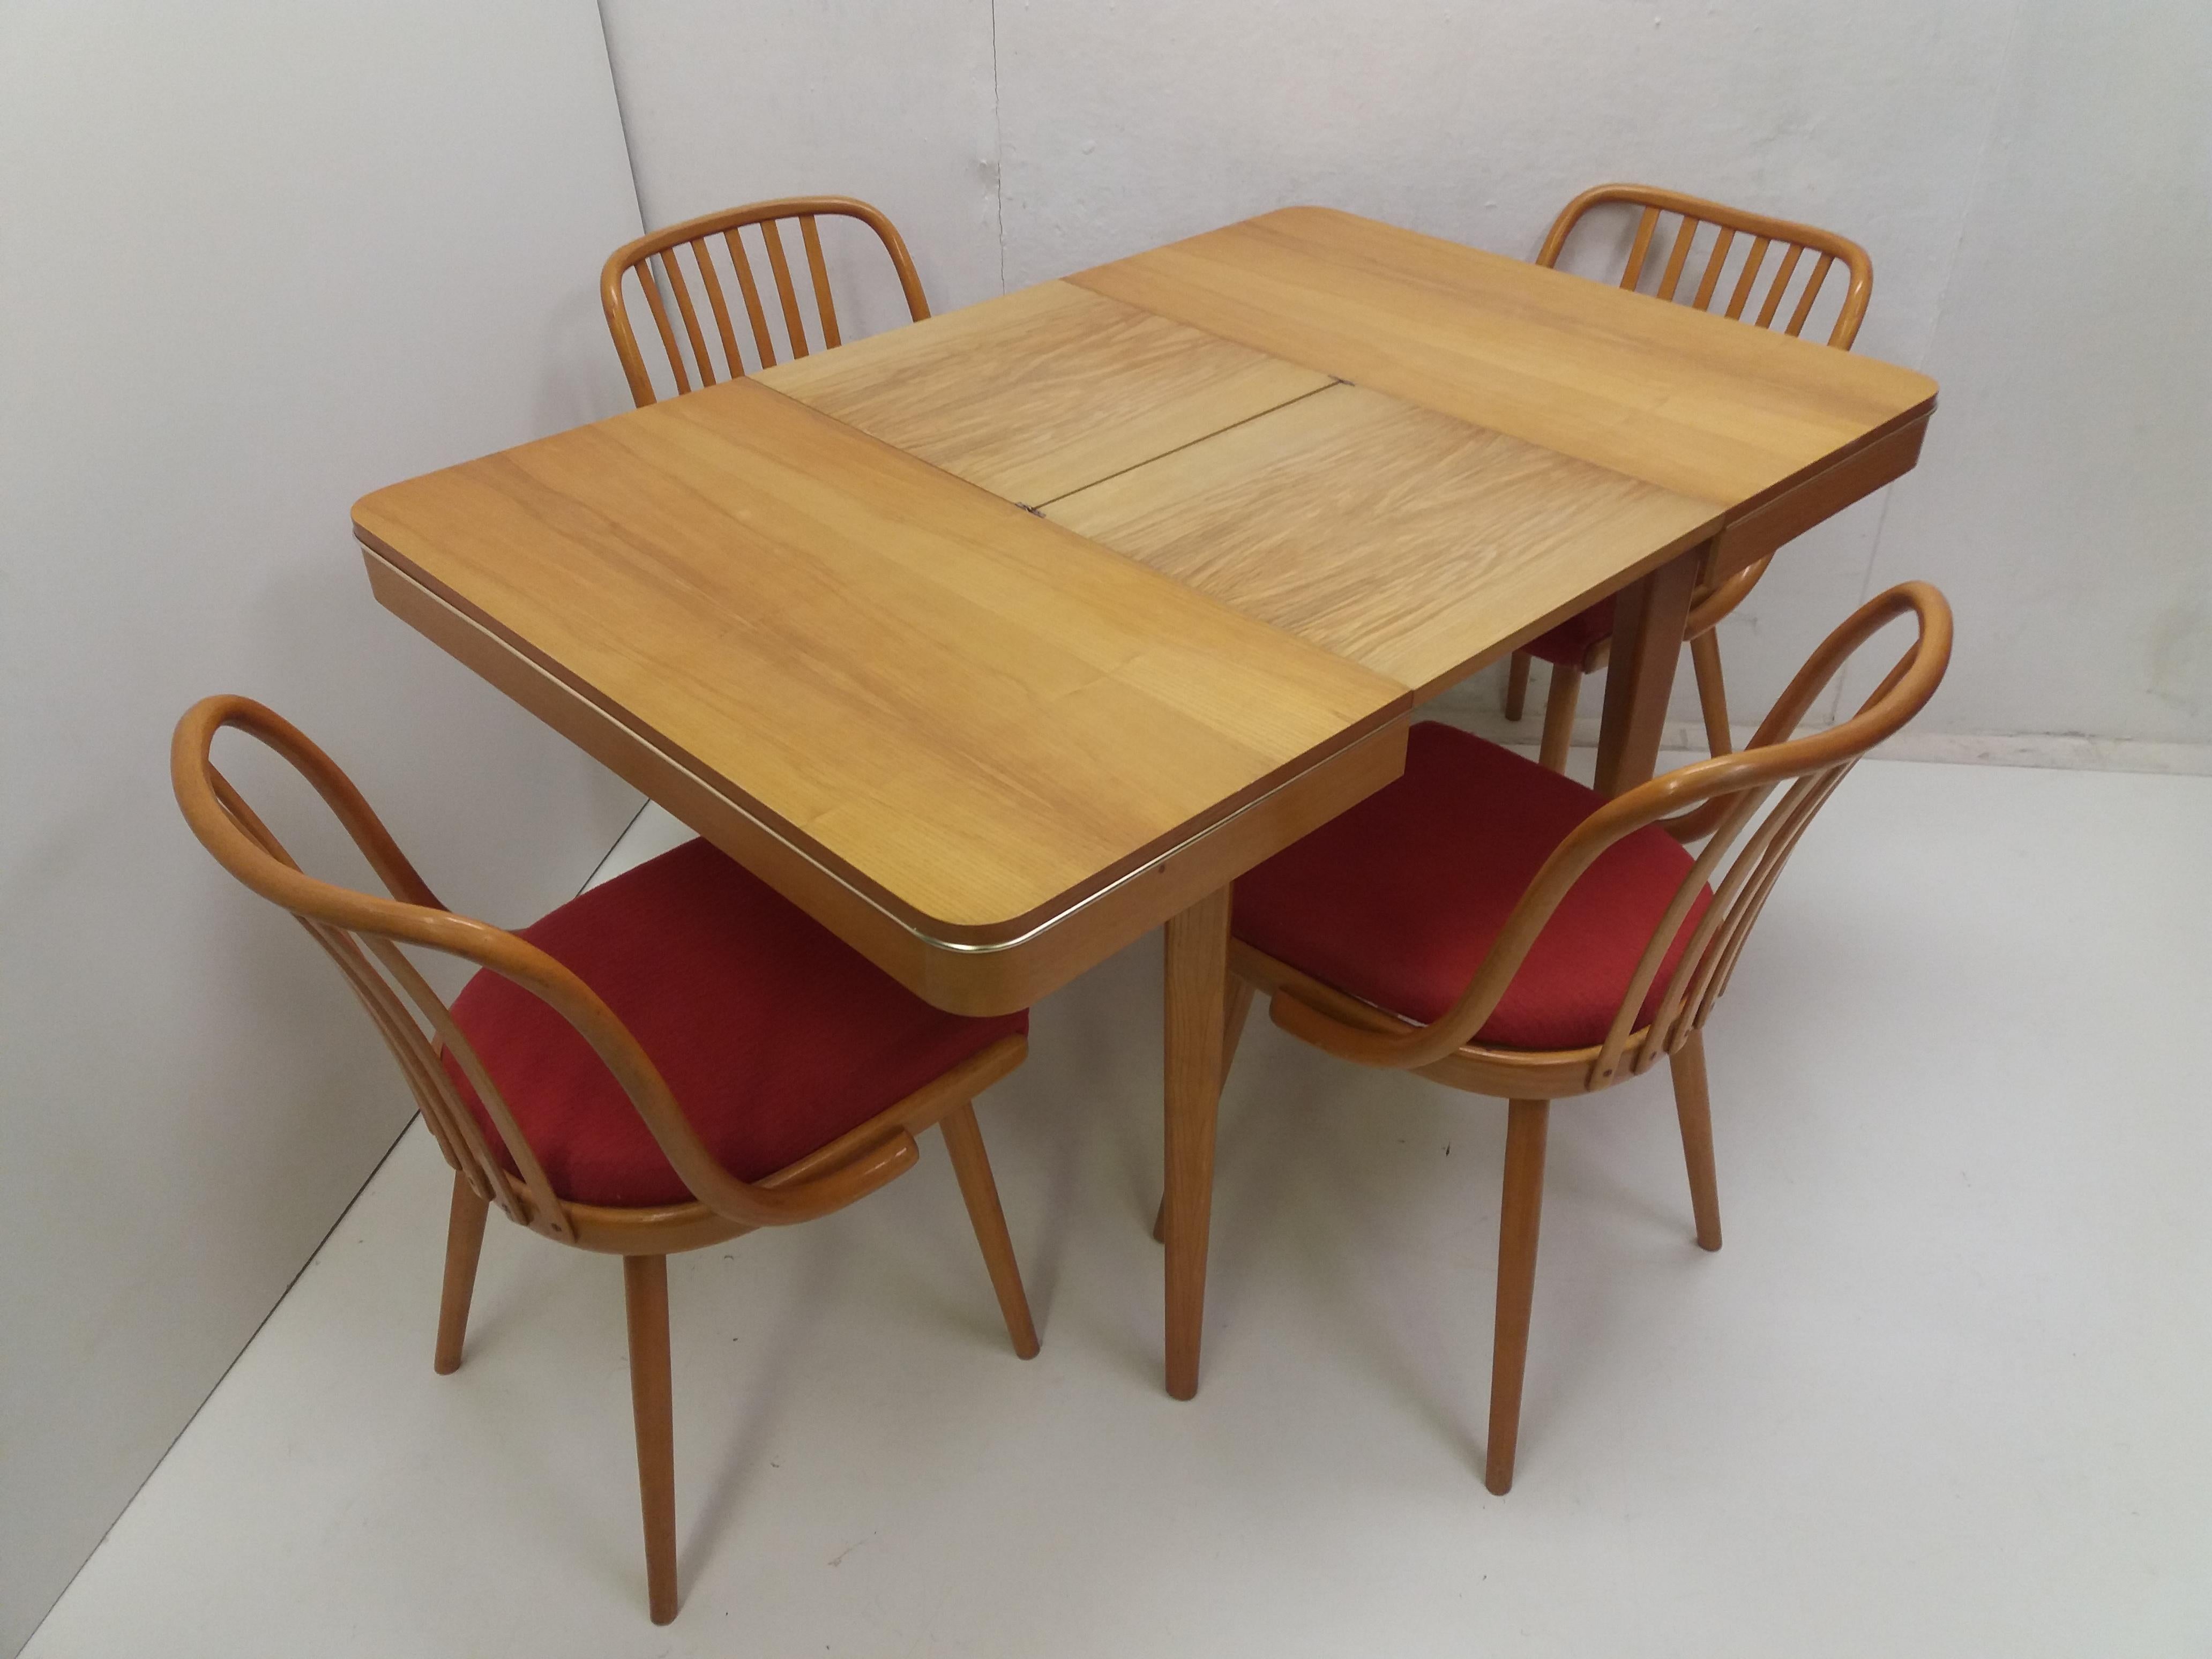 1960 retro kitchen table and chairs